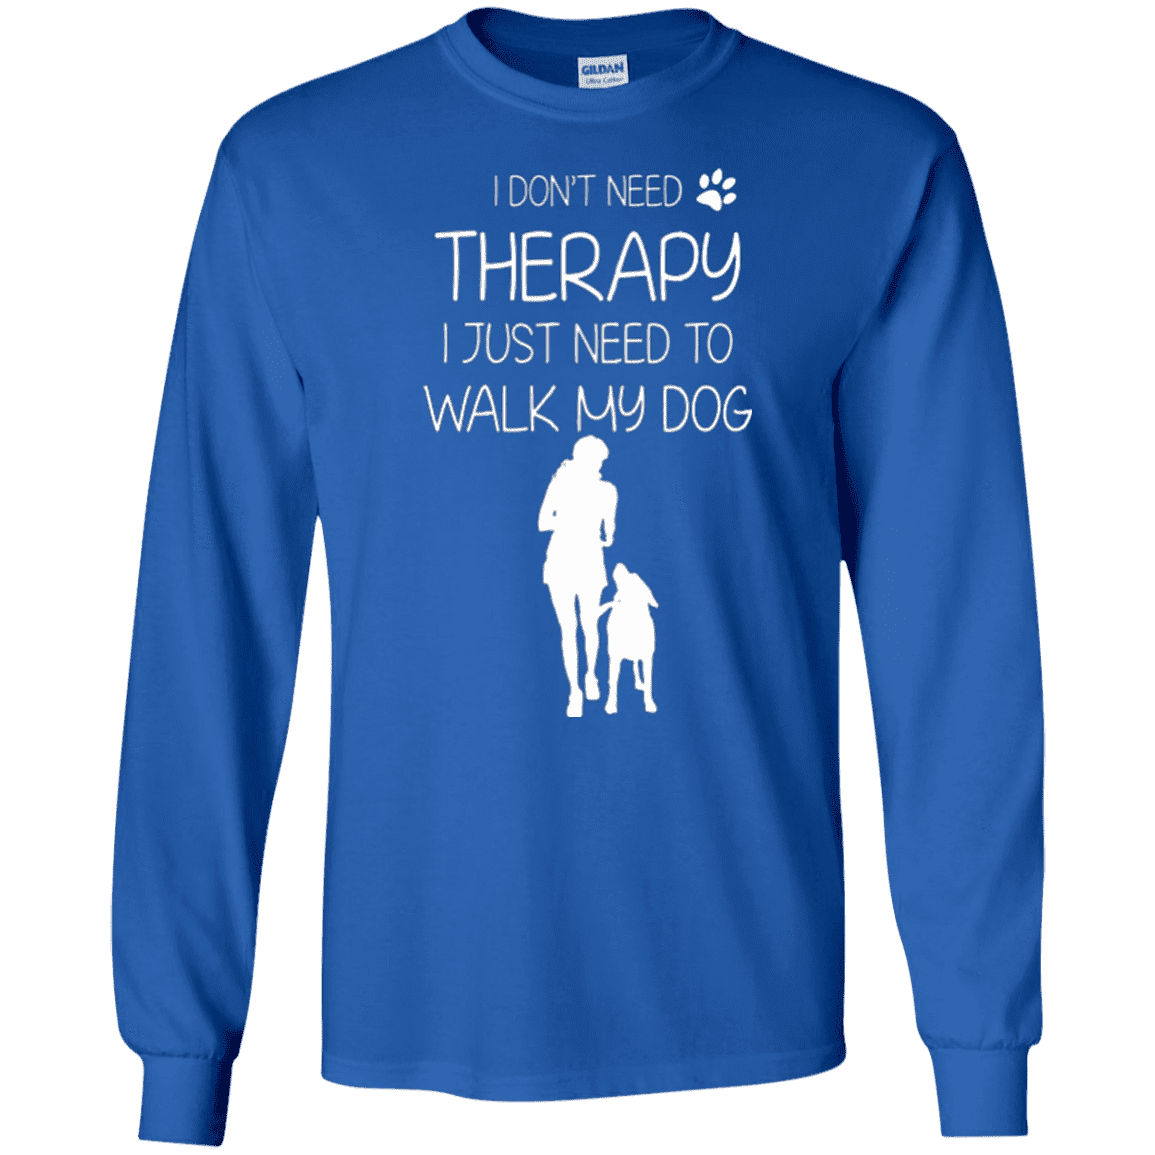 I Don't Need Therapy - Long Sleeve T Shirt.